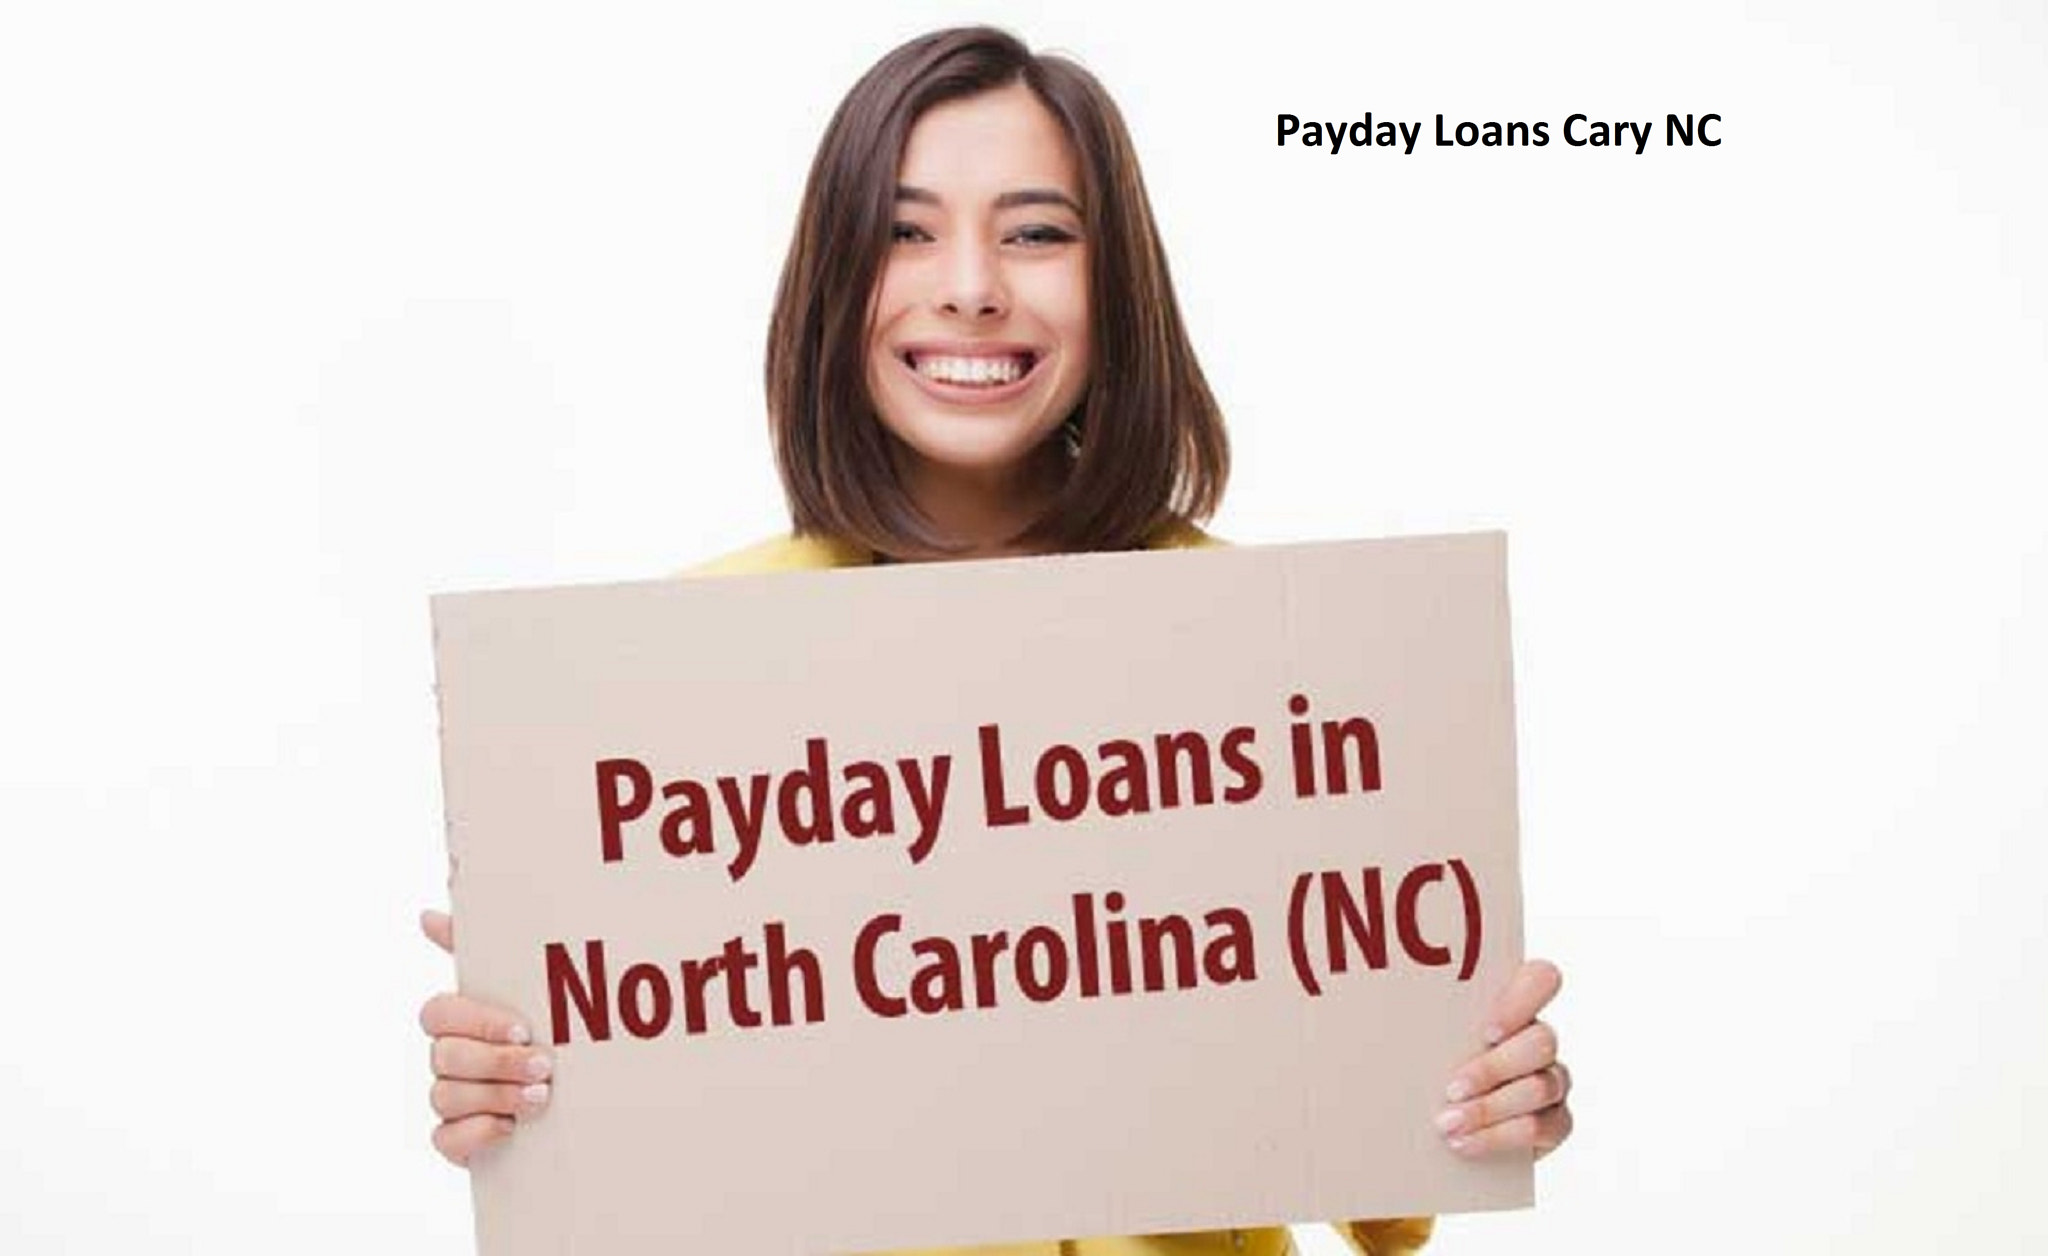 Payday Loans in Morrisville NC | Payday Loans in Burlington NC